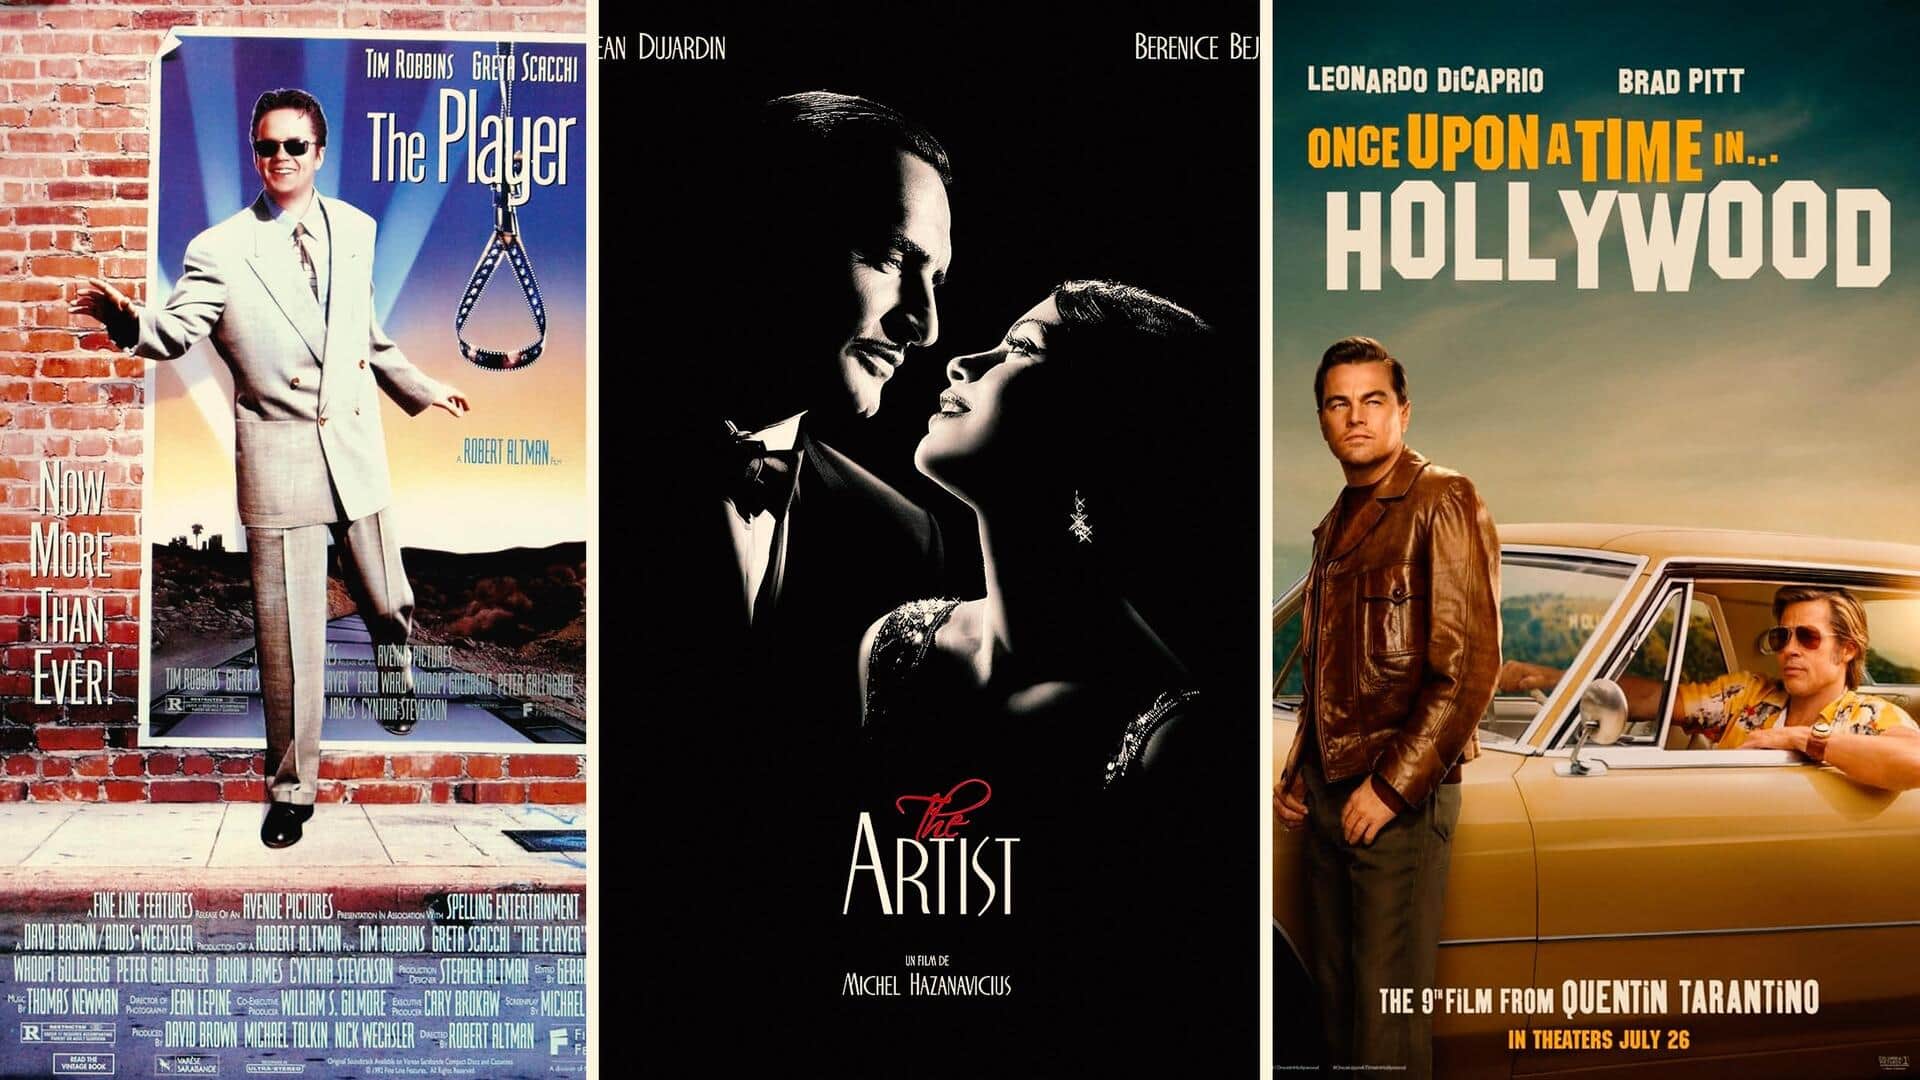 Top 5 Hollywood movies about Hollywood